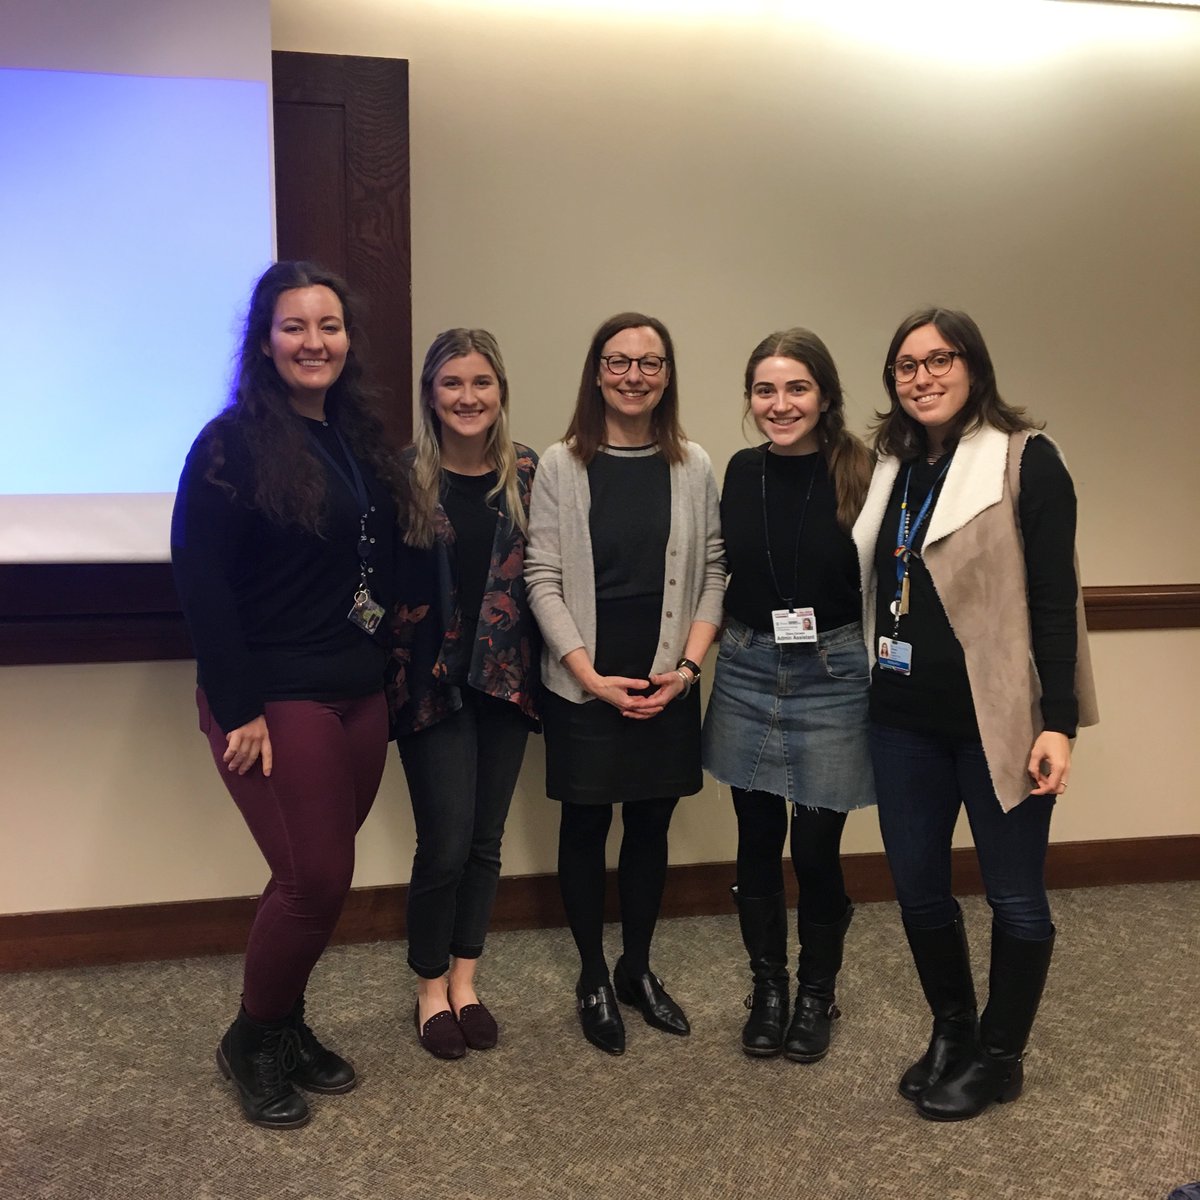 Big shout out to Penn Future Women in Health for hosting Shelley Berger last week to discuss not just epigenetics and her research background but also gender equality and combating discrimination in the sciences!